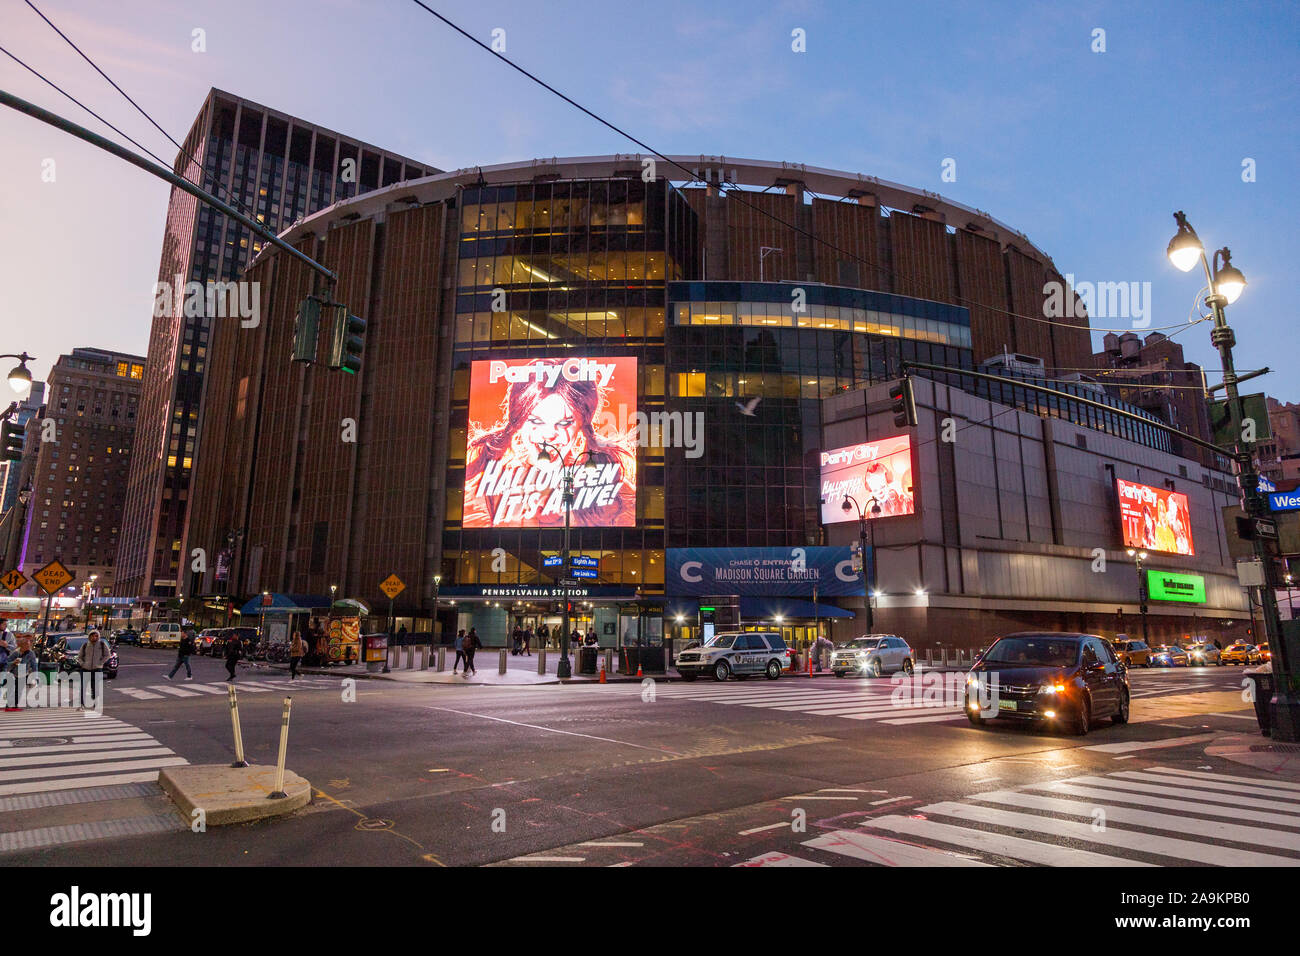 Madison Square Gardens, New York, United States of America Banque D'Images